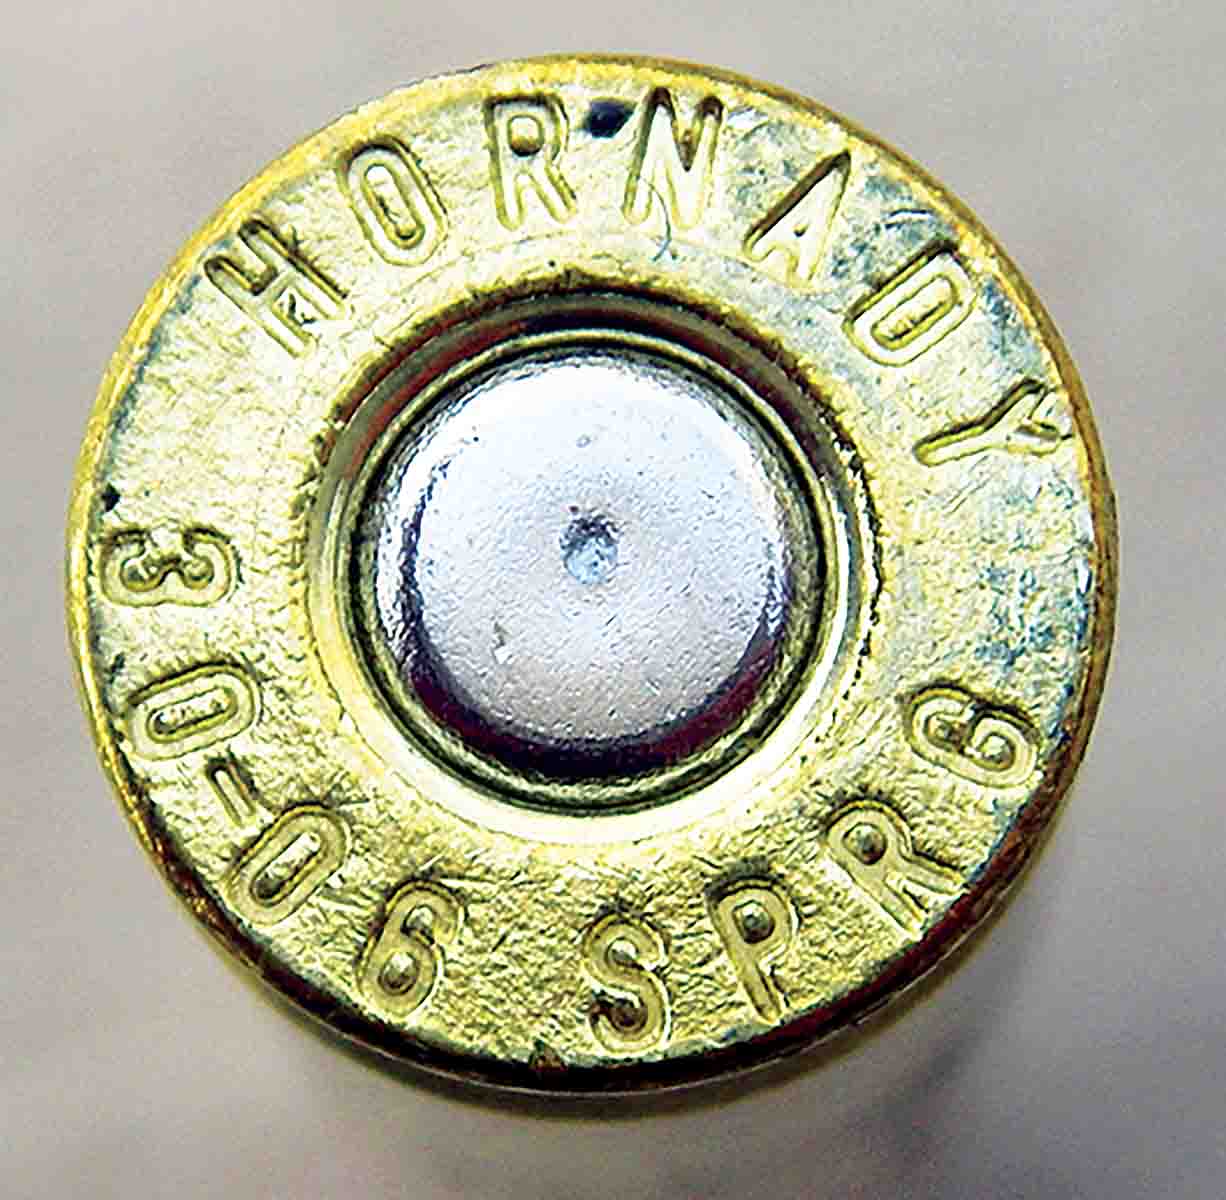 This live primer shows the typical indention by the floating firing pin that occurs when loaded cartridges are slammed hard into the chamber of a M1 Garand. To prevent dangerous slam-fires, Brian strongly suggests using the MIL-SPEC CCI No. 34 primer that is engineered to be less sensitive and designed specifically for this application.